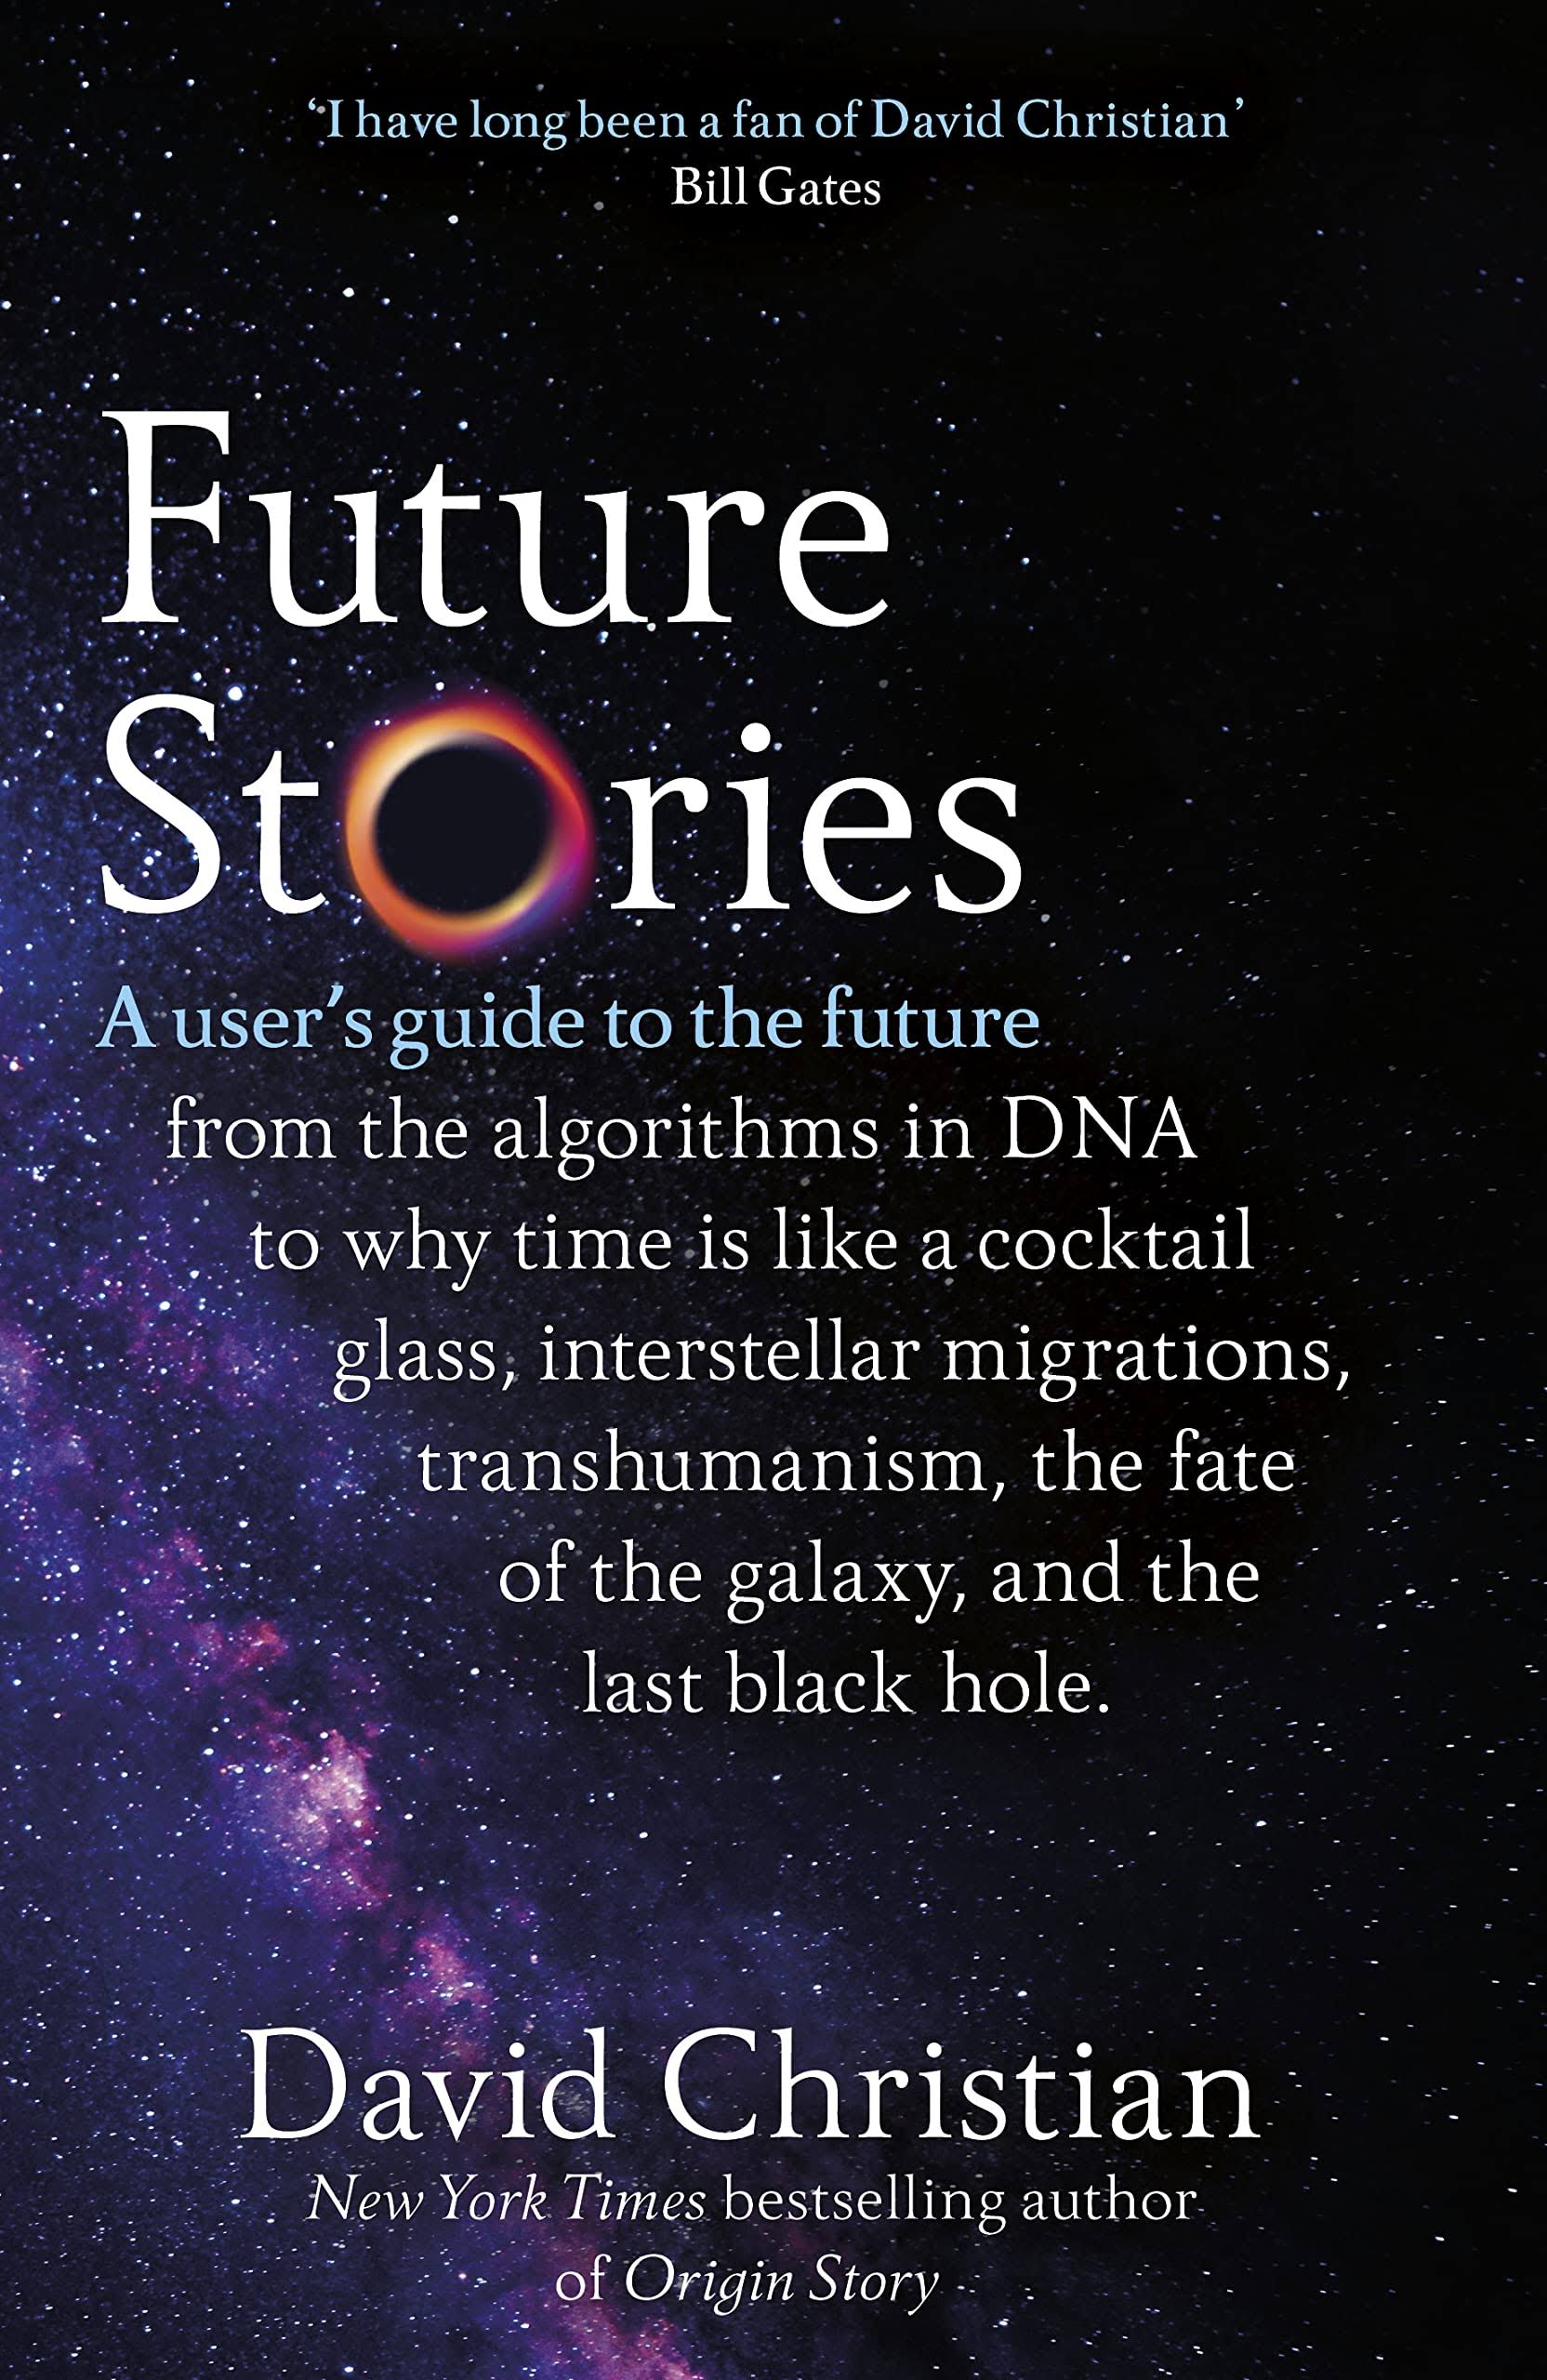 Future Stories: A User's Guide to the Future [Book]